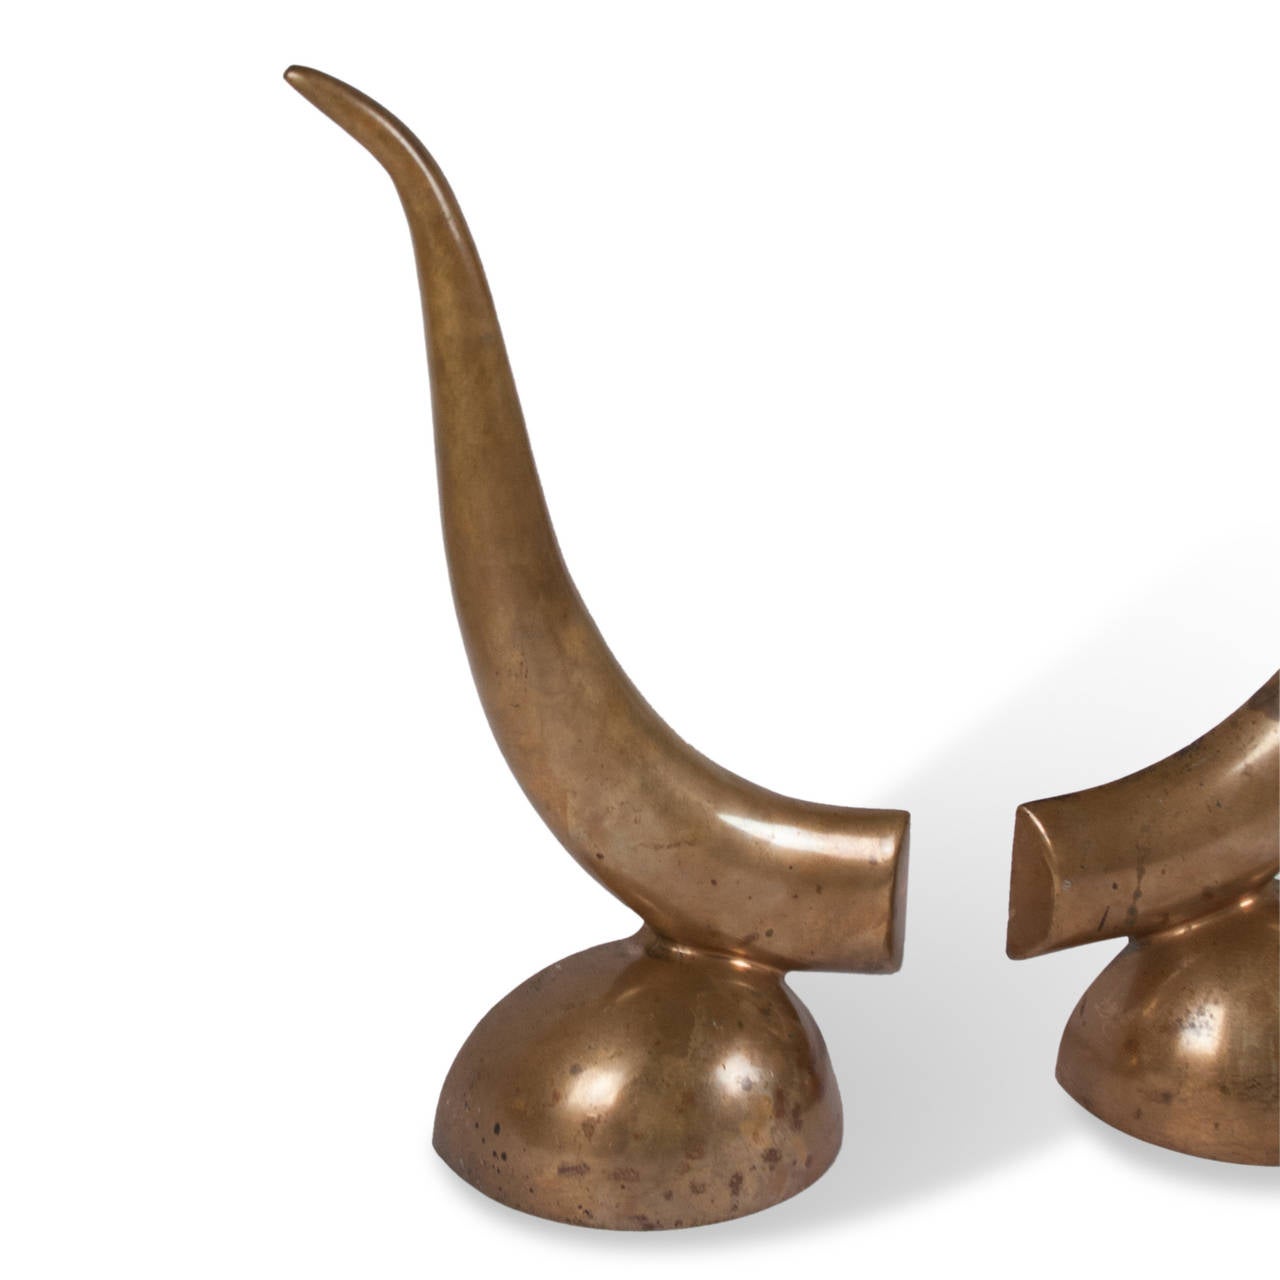 Pair of solid bronze chenets, each of a tapered horn-like form, resting on a semispherical base, French, 1940s. Measures: 4 in. D, 7 in. W, 18 in. H. 